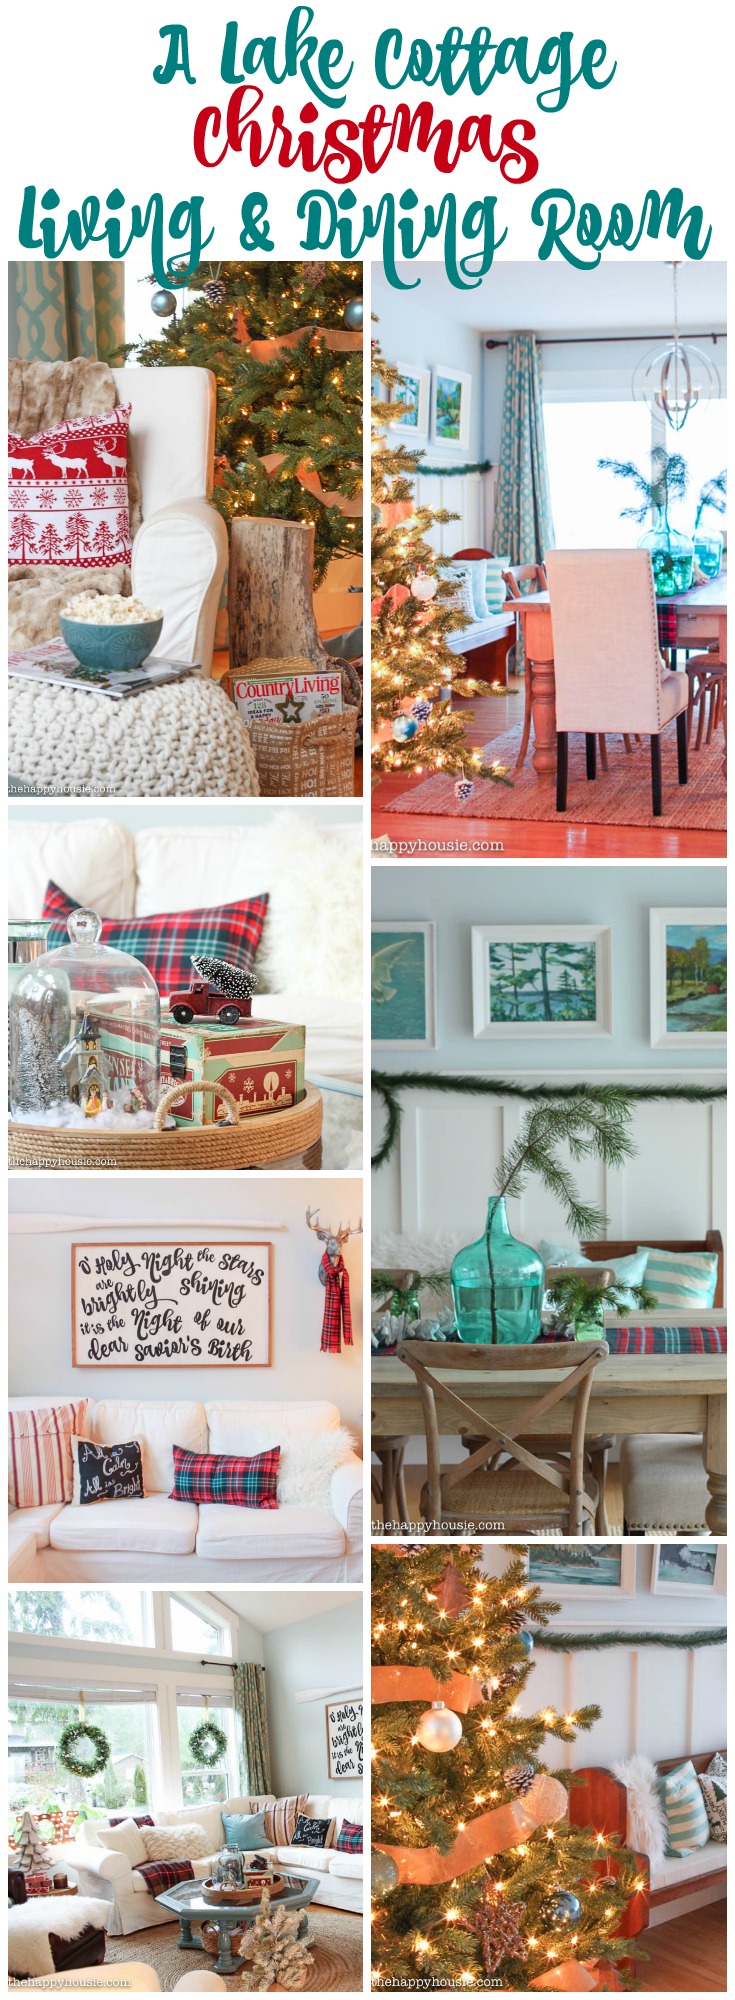 A Lake Cottage Christmas Living & Dining Room tours at thehappyhousie.com - part of the Country Living Christmas Tour